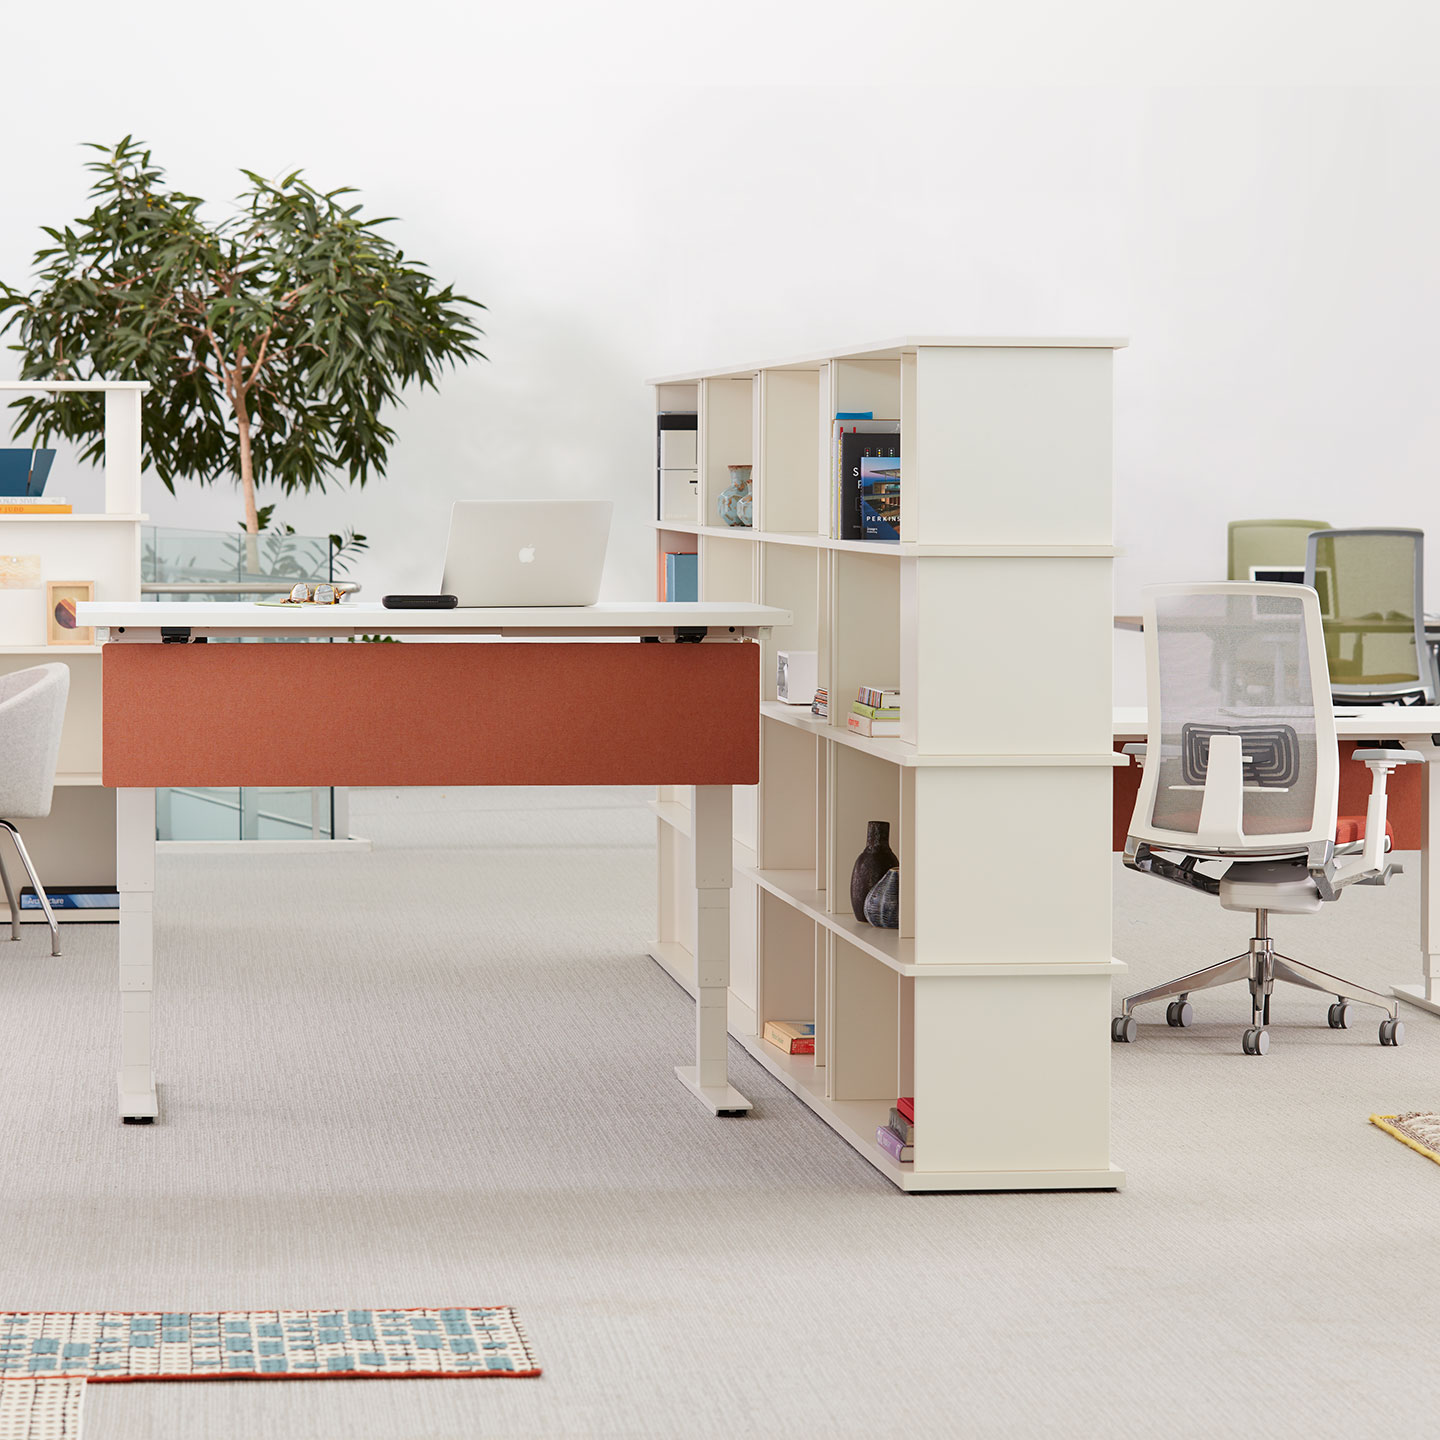 Haworth Hop Height Adjustable Table in a open office seating with Haworth chairs